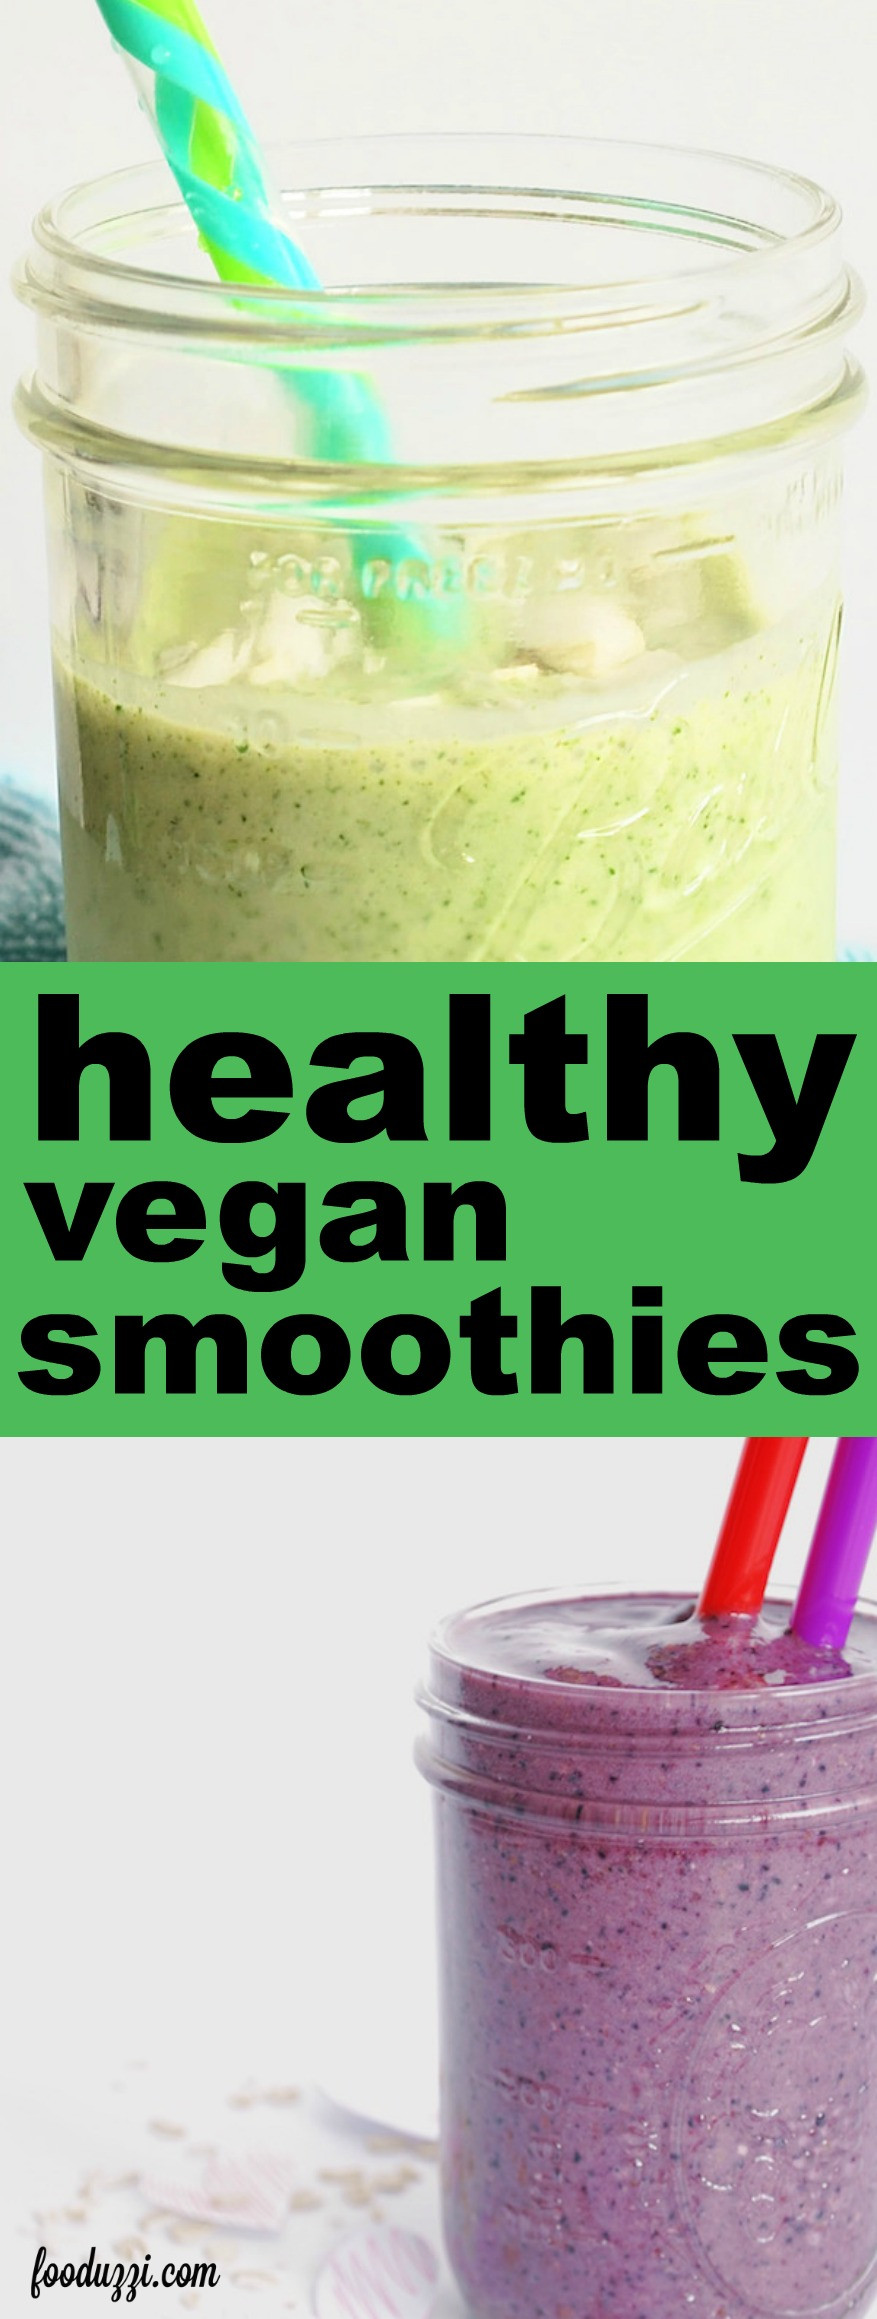 Healthy Vegan Smoothie Recipes
 Healthy Vegan Smoothie Recipes for the New Year Fooduzzi